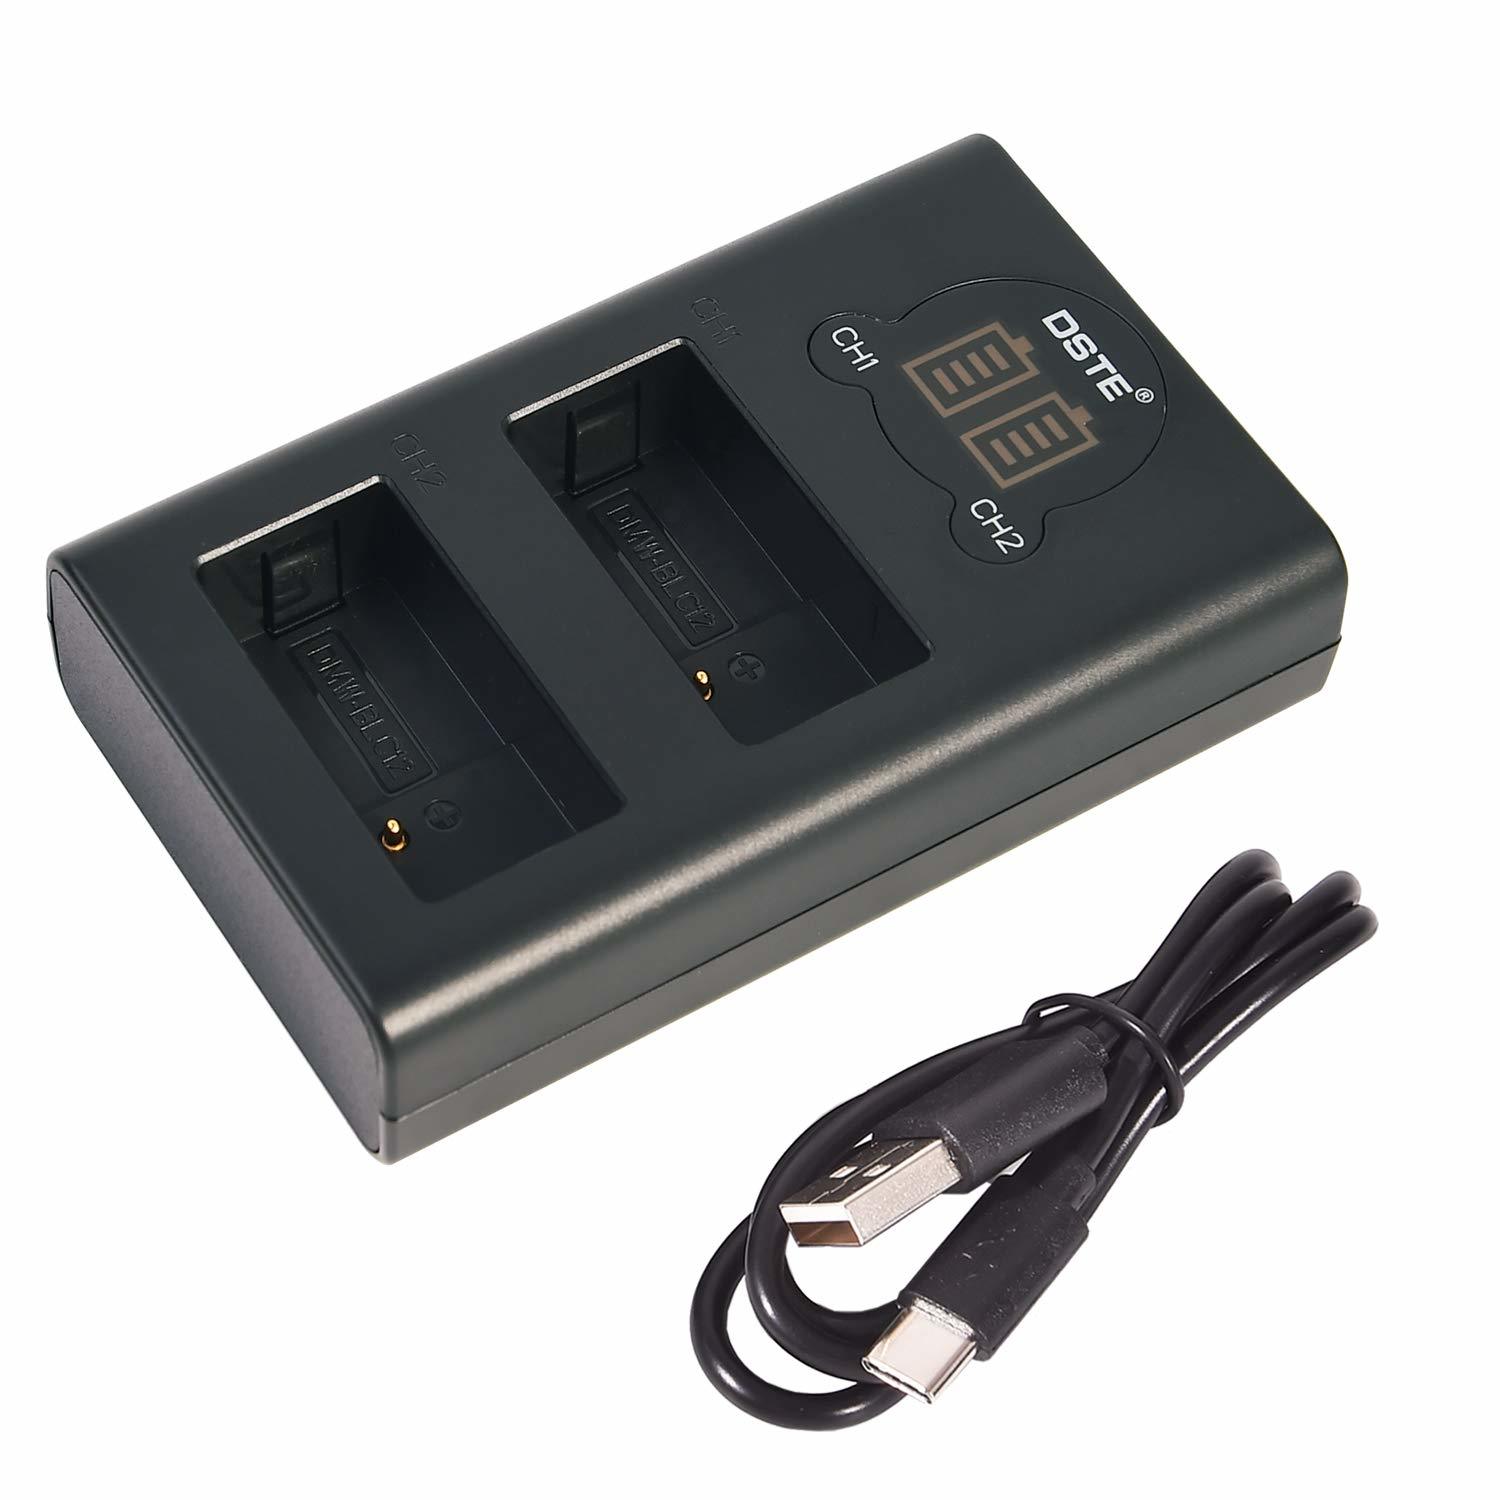 E Replacement For Dual Lcd Battery Charger Compatible Panasonic Dmw-Bl - $17.99